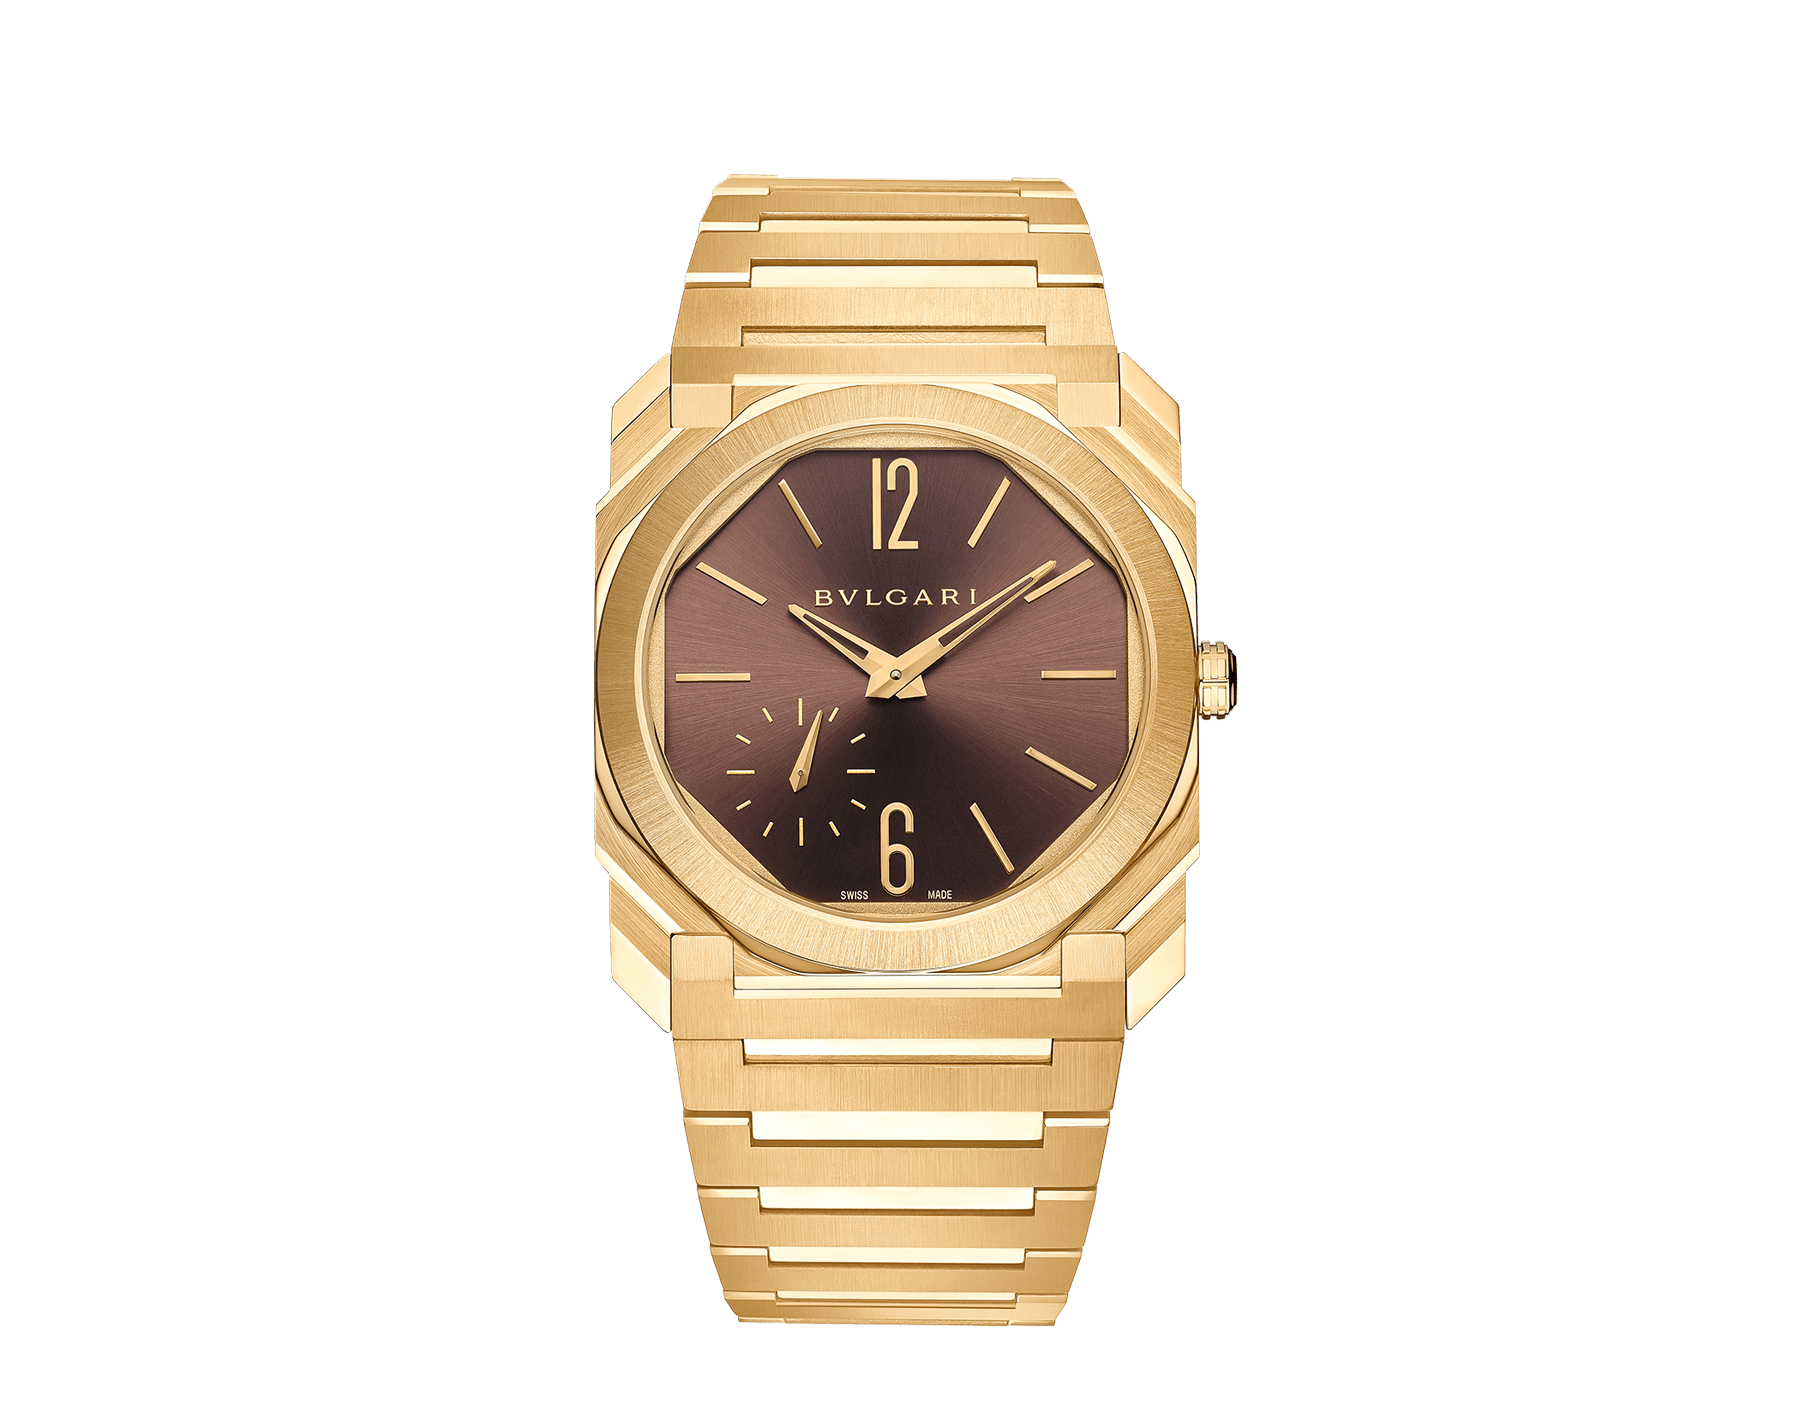 Octo Finissimo Automatic watch features mechanical manufacture ultra-thin movement (2.23 mm thick), automatic winding, 40 mm satin-polished 18 kt yellow gold case and bracelet, and brown lacquered dial with sunray finishing. Water-resistant up to 100 meters. Limited Edition of 50 pieces exclusive to the United States. 103717 image 1